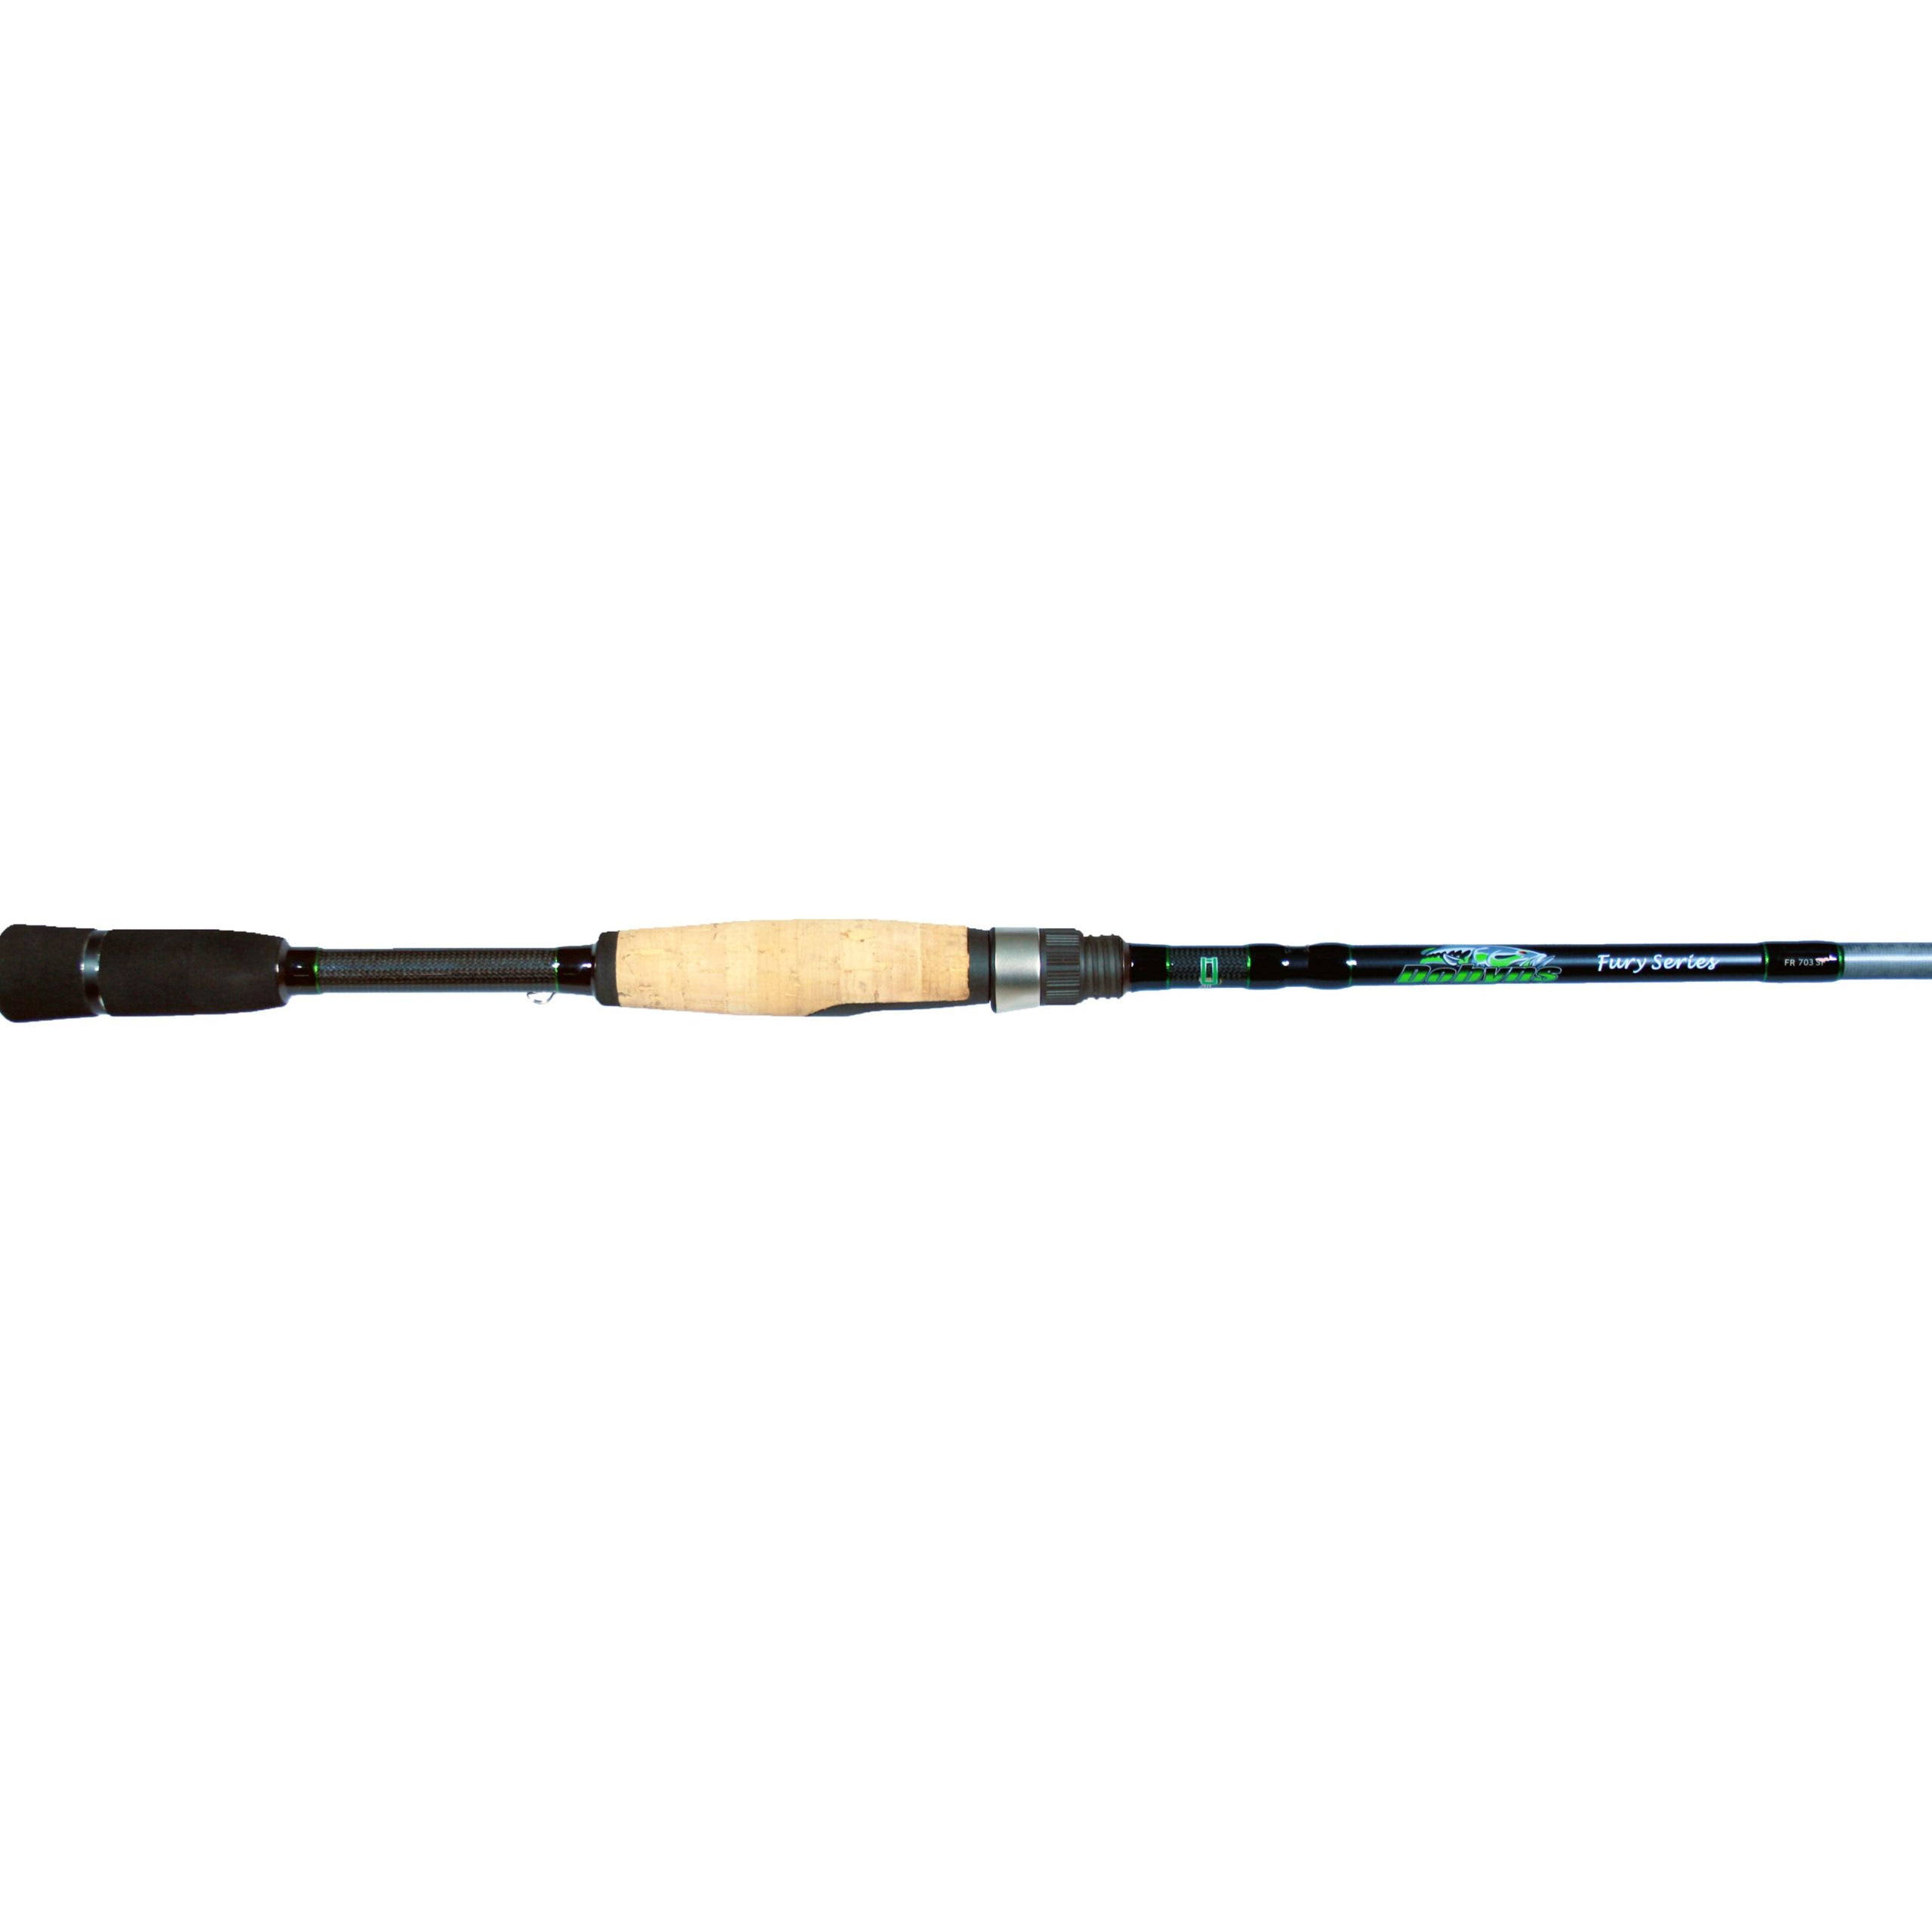 Dobyns Rods Fury Series 7’0” Spinning Fishing Rod | FR703SF | Medium Fast Action Rod | Modulus Graphite Blank with Kevlar Wrapping | Fuji Reel Seats